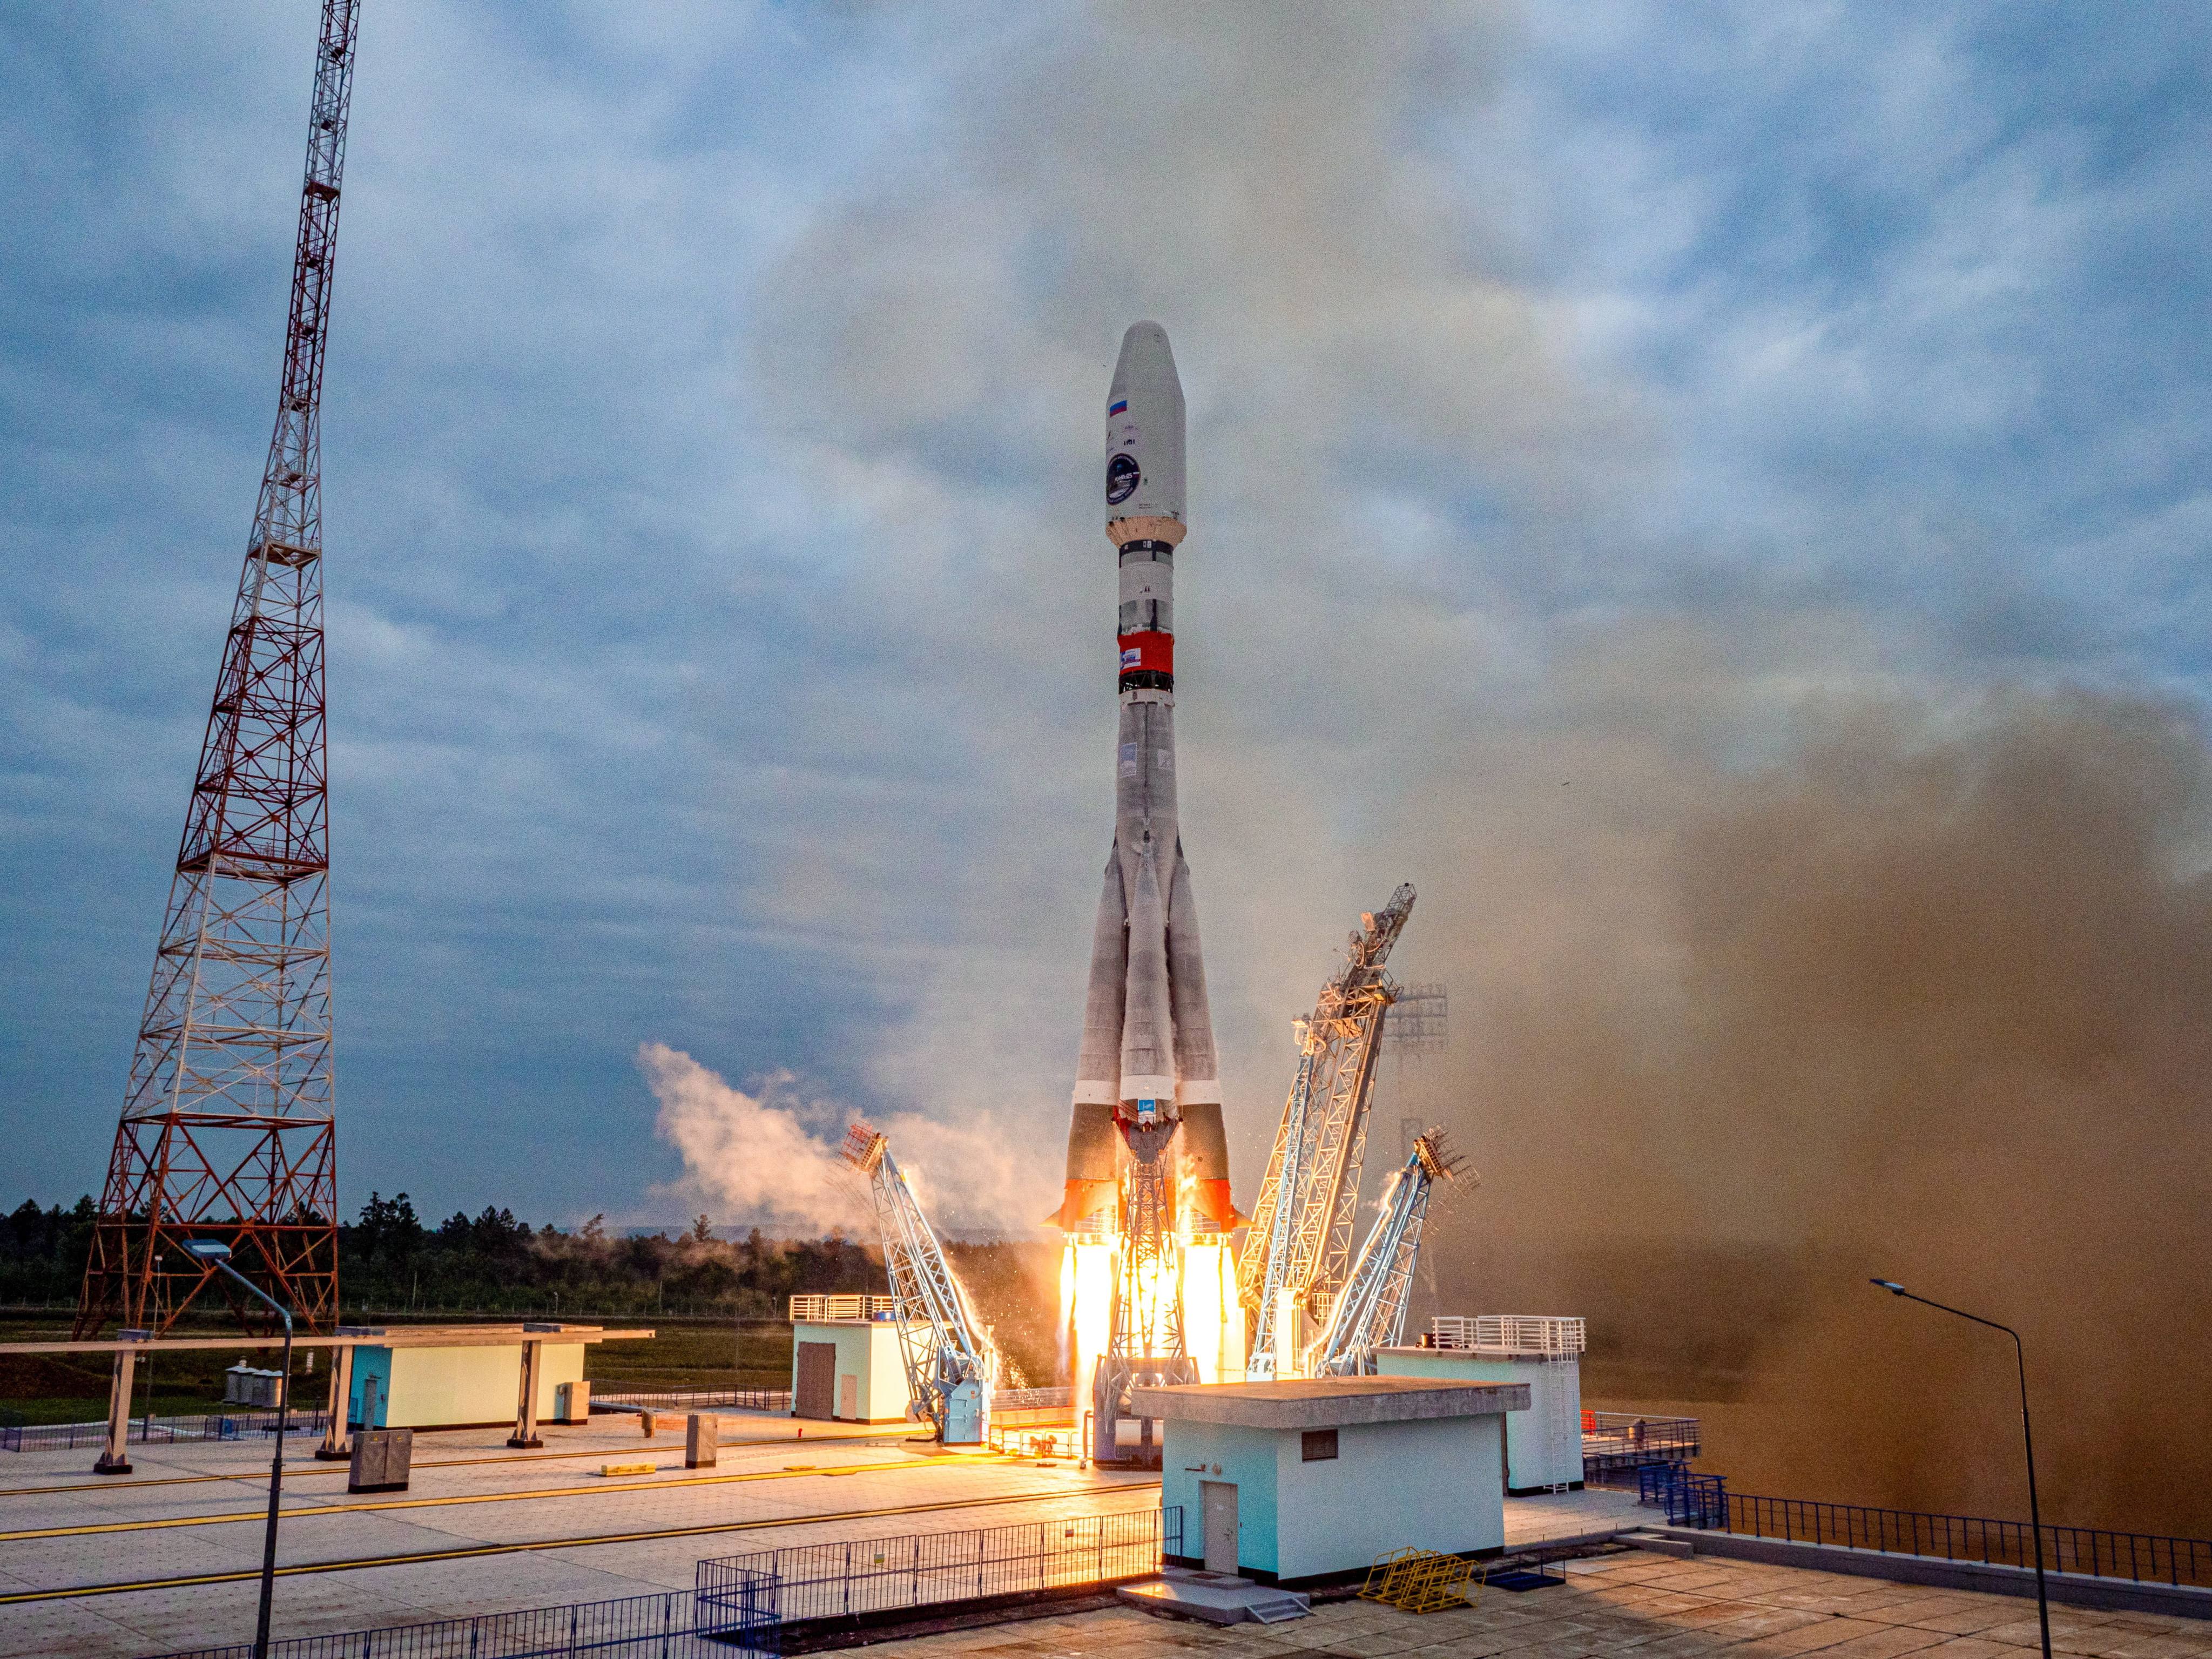 On August 11, Russia’s Luna-25 launches from Vostochny Cosmodrome. The spacecraft reported an “emergency situation on board” before contact was lost and it “ceased to exist”, Roscosmos said on Saturday.  Photo: Roscosmos